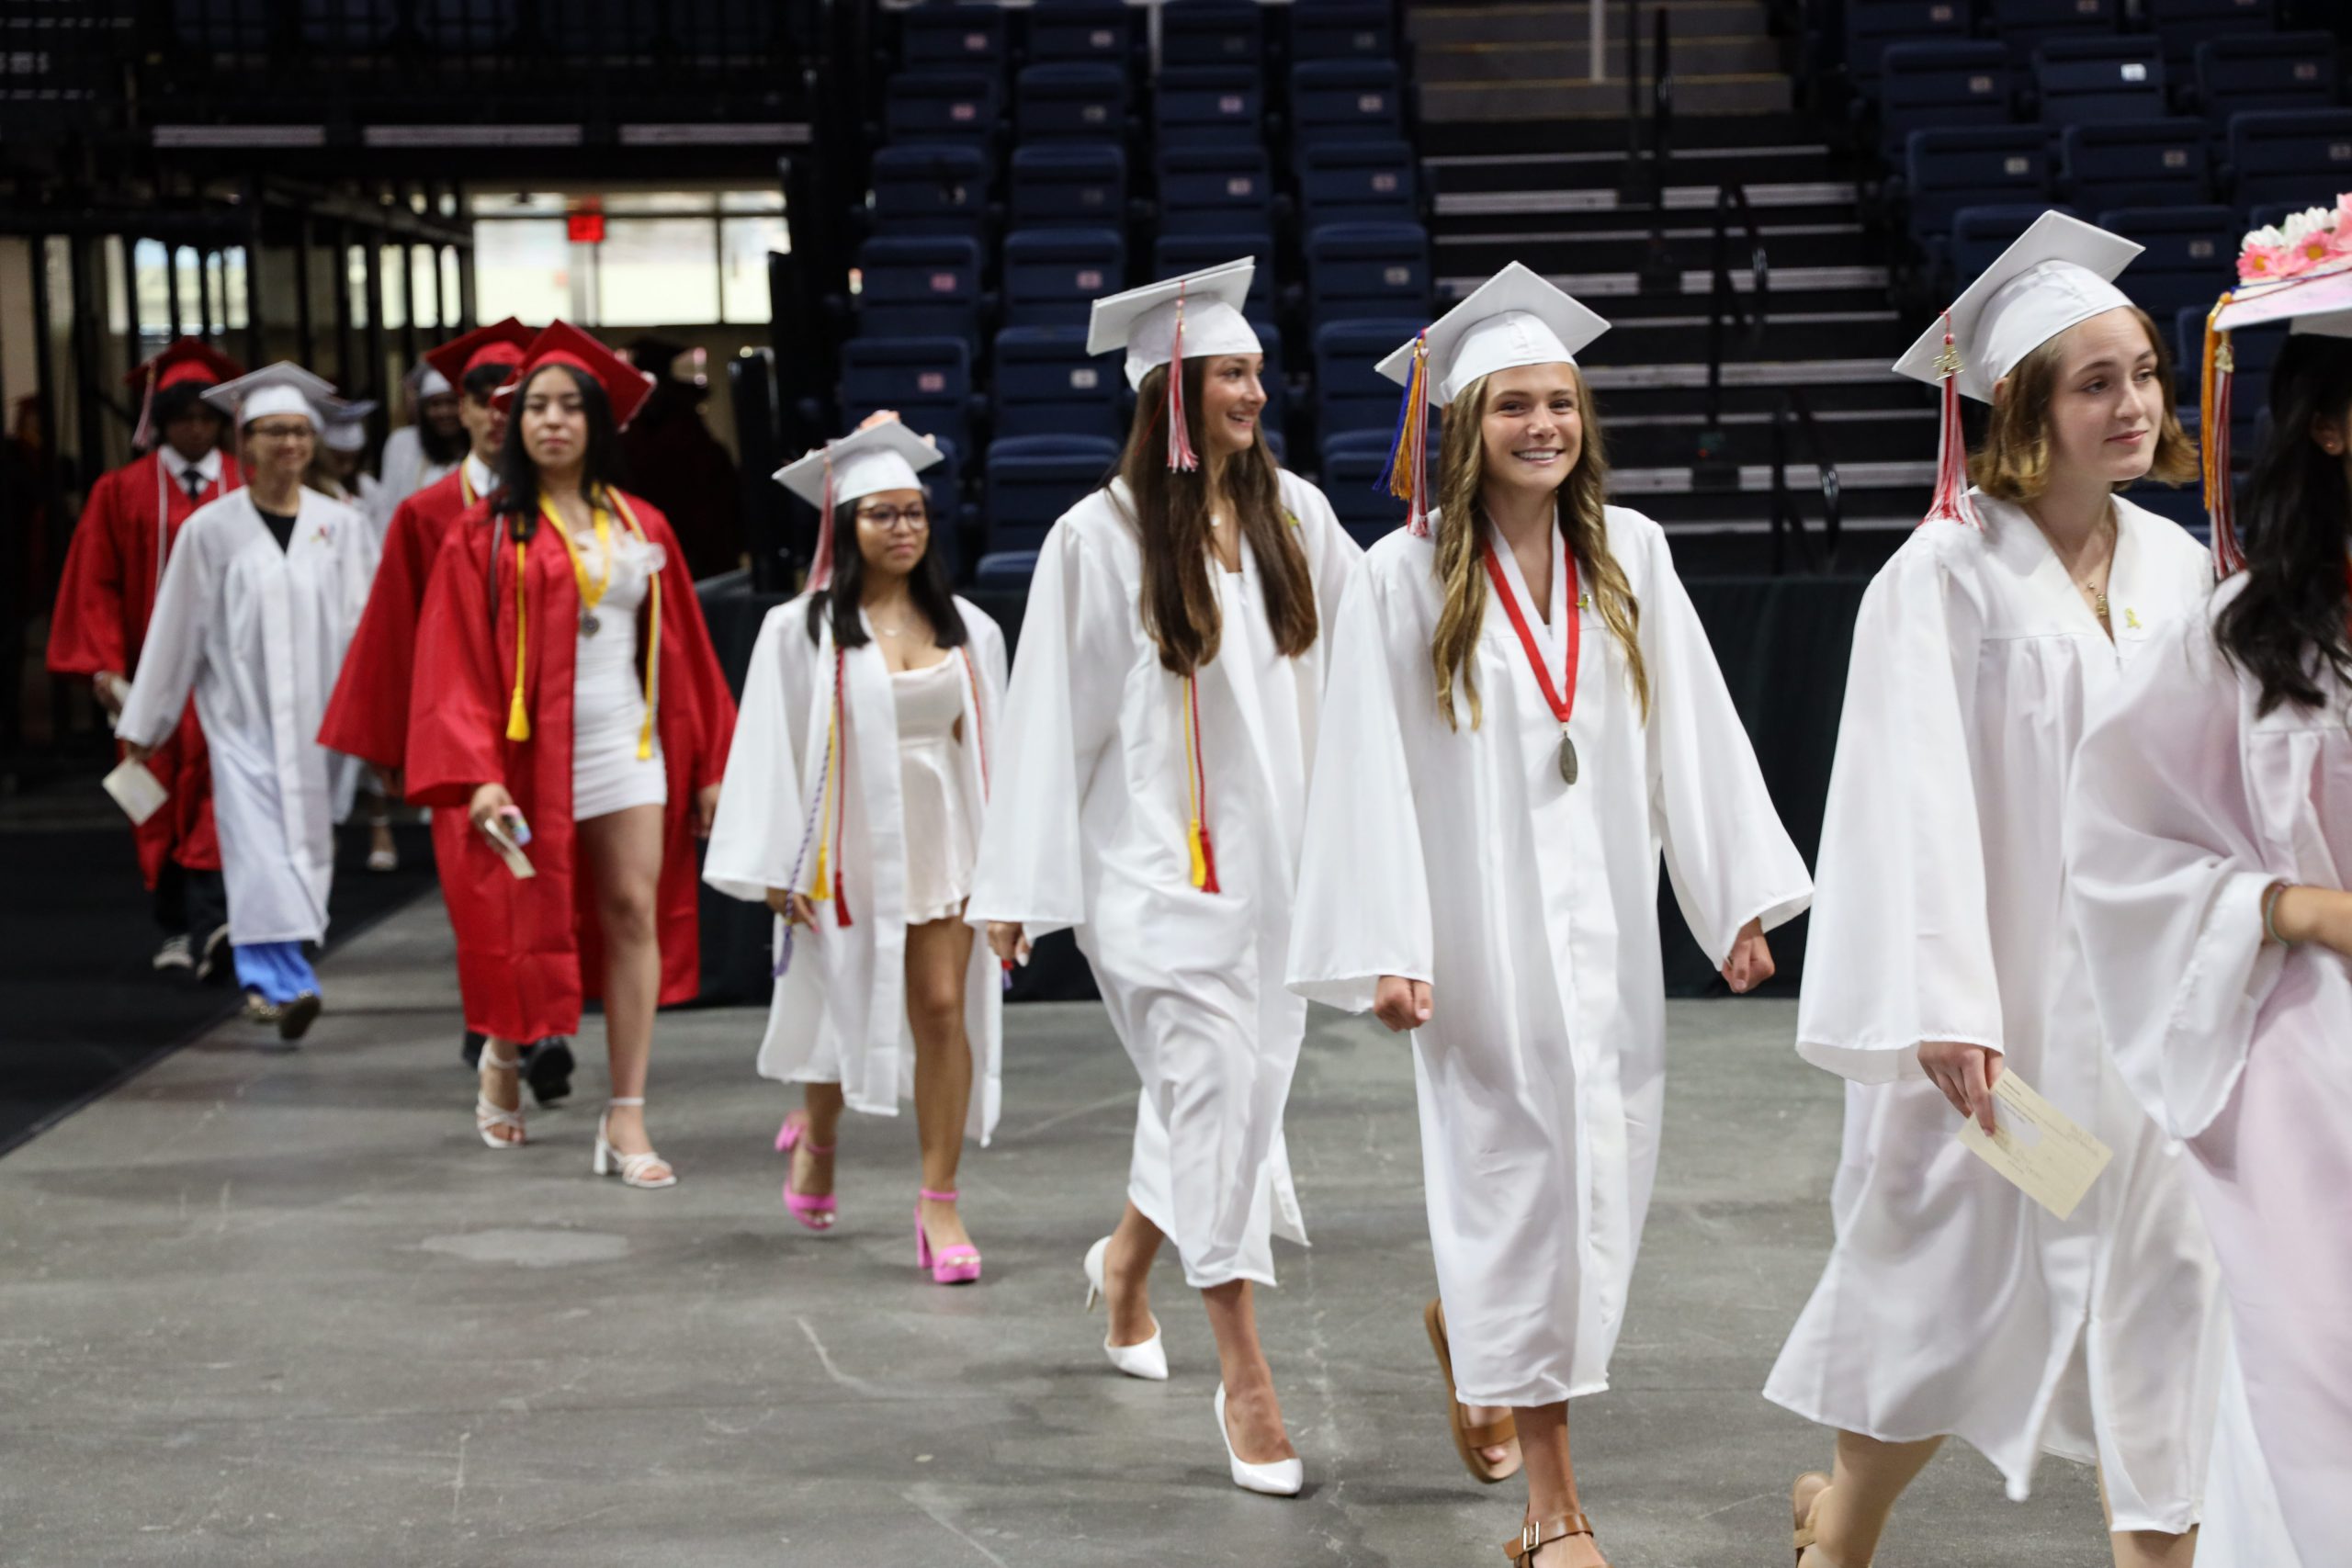 Group of graduates walking into the arena. Most of the graduates are wearing white caps and gowns, while a few students in the back of the photo are wearing red caps and gowns.